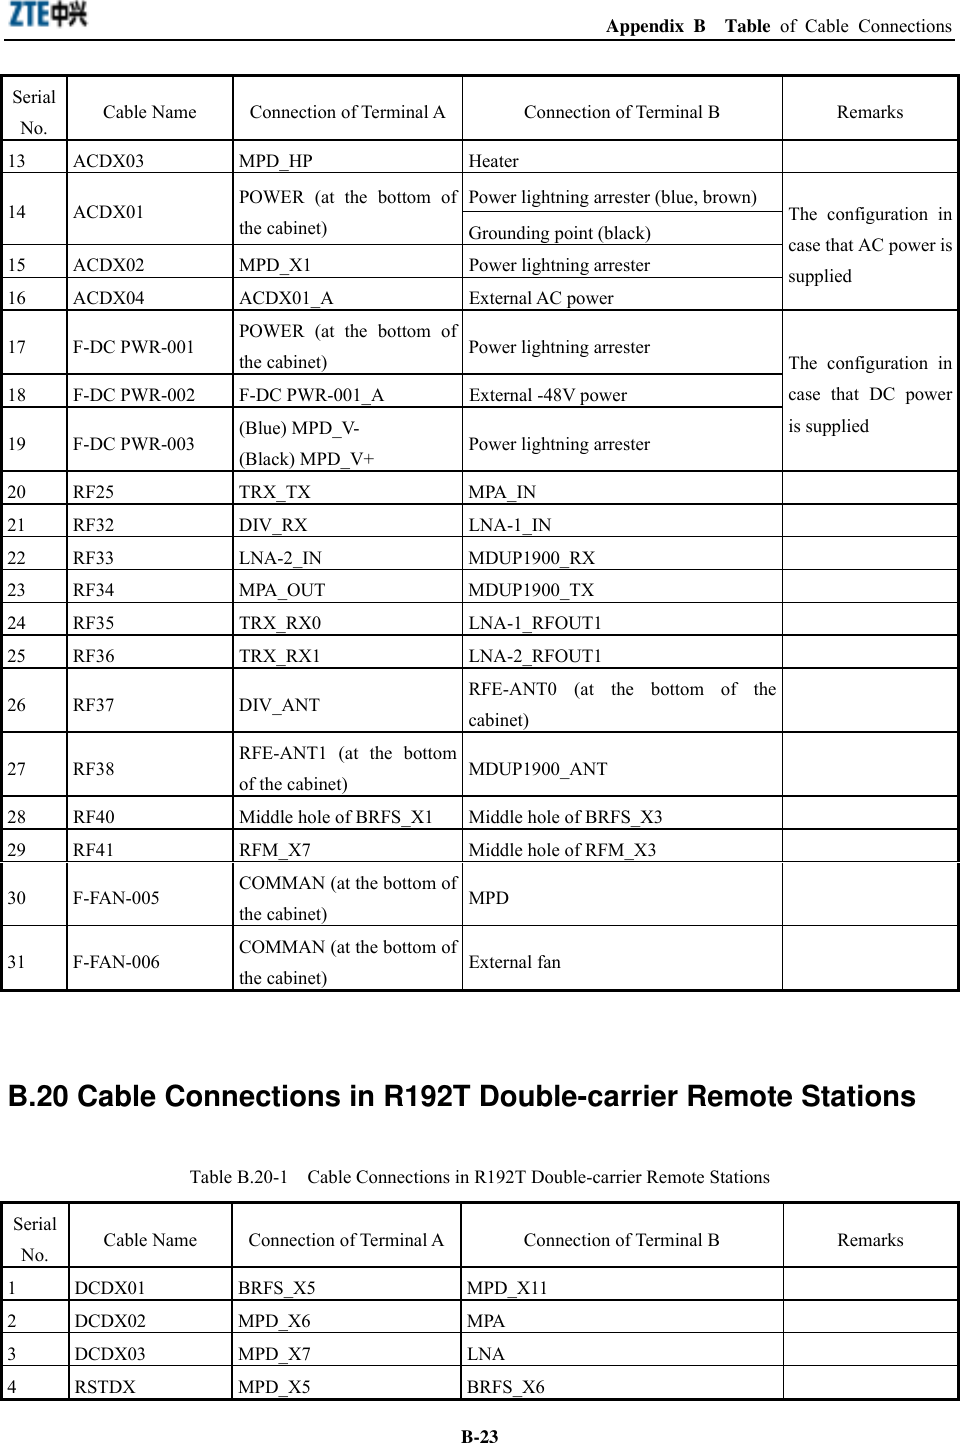  Appendix B  Table of Cable Connections  B-23Serial No.  Cable Name  Connection of Terminal A Connection of Terminal B  Remarks 13 ACDX03  MPD_HP  Heater   Power lightning arrester (blue, brown) 14 ACDX01  POWER (at the bottom of the cabinet)  Grounding point (black) 15  ACDX02  MPD_X1  Power lightning arrester 16 ACDX04  ACDX01_A  External AC power The configuration in case that AC power is supplied 17 F-DC PWR-001 POWER (at the bottom of the cabinet)  Power lightning arrester 18  F-DC PWR-002  F-DC PWR-001_A  External -48V power 19 F-DC PWR-003 (Blue) MPD_V- (Black) MPD_V+  Power lightning arrester The configuration in case that DC power is supplied 20 RF25  TRX_TX  MPA_IN   21 RF32  DIV_RX  LNA-1_IN   22 RF33  LNA-2_IN  MDUP1900_RX   23 RF34  MPA_OUT  MDUP1900_TX   24 RF35  TRX_RX0  LNA-1_RFOUT1   25 RF36  TRX_RX1  LNA-2_RFOUT1   26 RF37  DIV_ANT  RFE-ANT0 (at the bottom of the cabinet)   27 RF38  RFE-ANT1 (at the bottom of the cabinet)  MDUP1900_ANT  28  RF40  Middle hole of BRFS_X1  Middle hole of BRFS_X3   29  RF41  RFM_X7  Middle hole of RFM_X3   30 F-FAN-005  COMMAN (at the bottom of the cabinet)  MPD  31 F-FAN-006  COMMAN (at the bottom of the cabinet)  External fan    B.20 Cable Connections in R192T Double-carrier Remote Stations Table B.20-1    Cable Connections in R192T Double-carrier Remote Stations Serial No.  Cable Name  Connection of Terminal A Connection of Terminal B  Remarks 1 DCDX01  BRFS_X5  MPD_X11   2 DCDX02  MPD_X6  MPA   3 DCDX03  MPD_X7  LNA   4 RSTDX  MPD_X5  BRFS_X6   